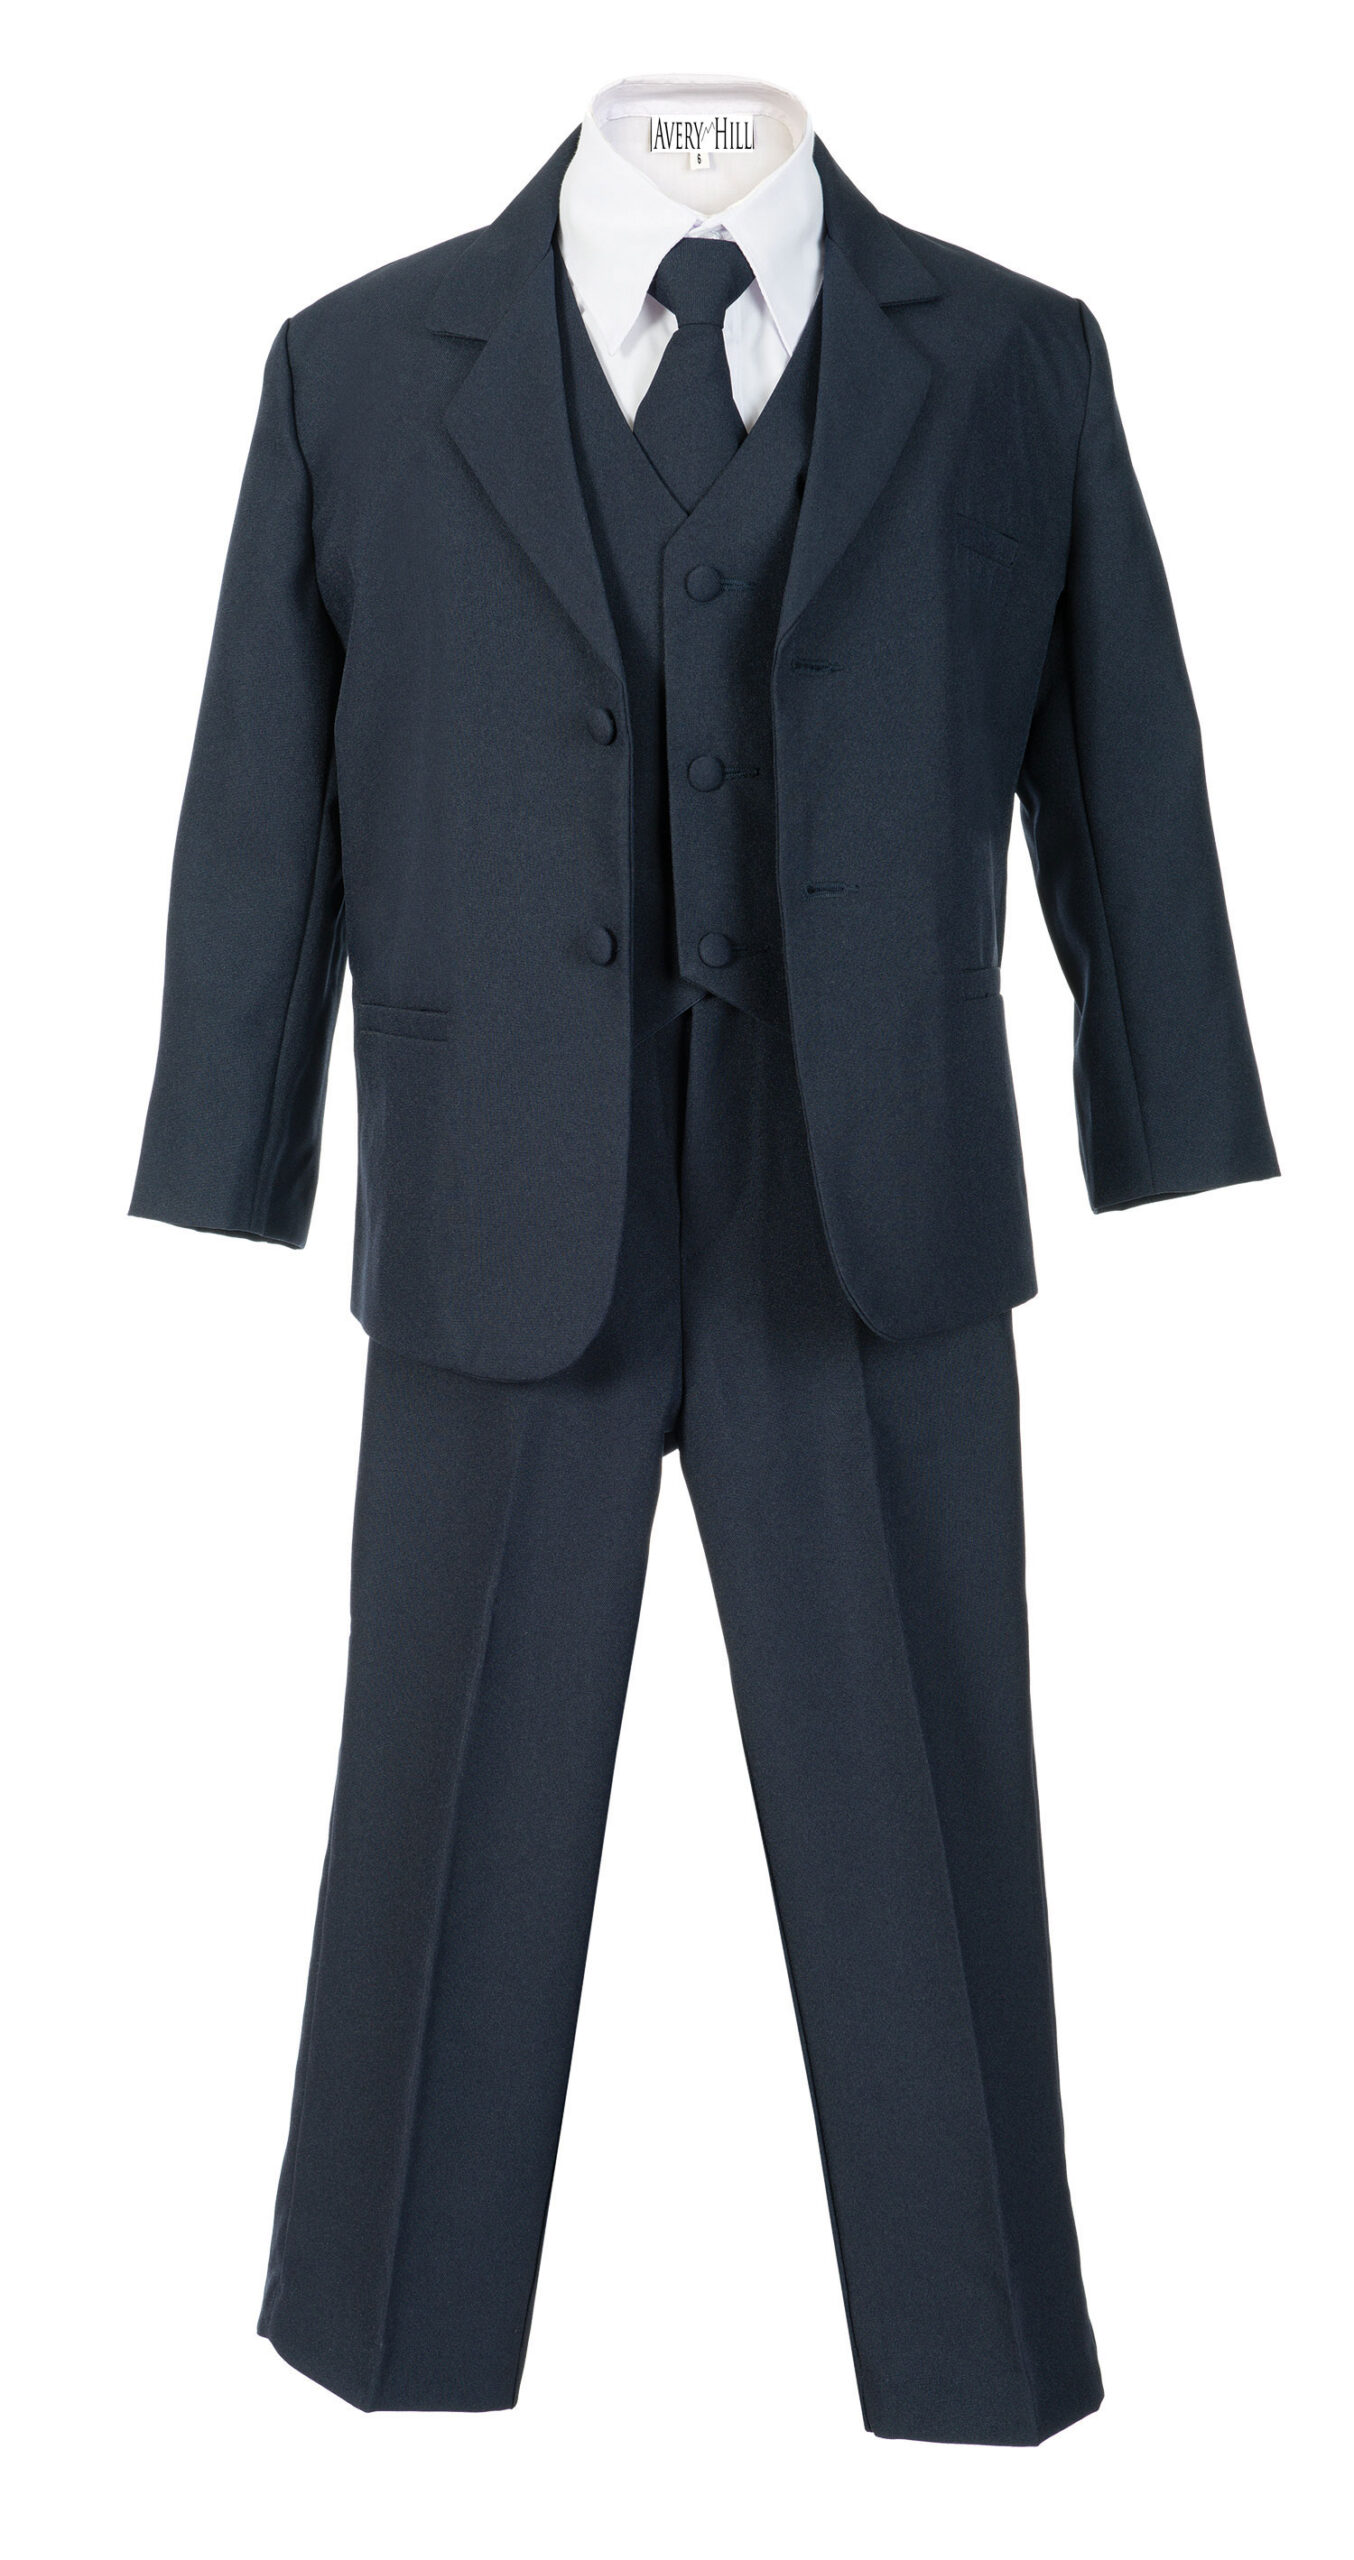 Avery Hill Boys Formal 5 Piece Suit with Shirt and Vest Navy - 2T